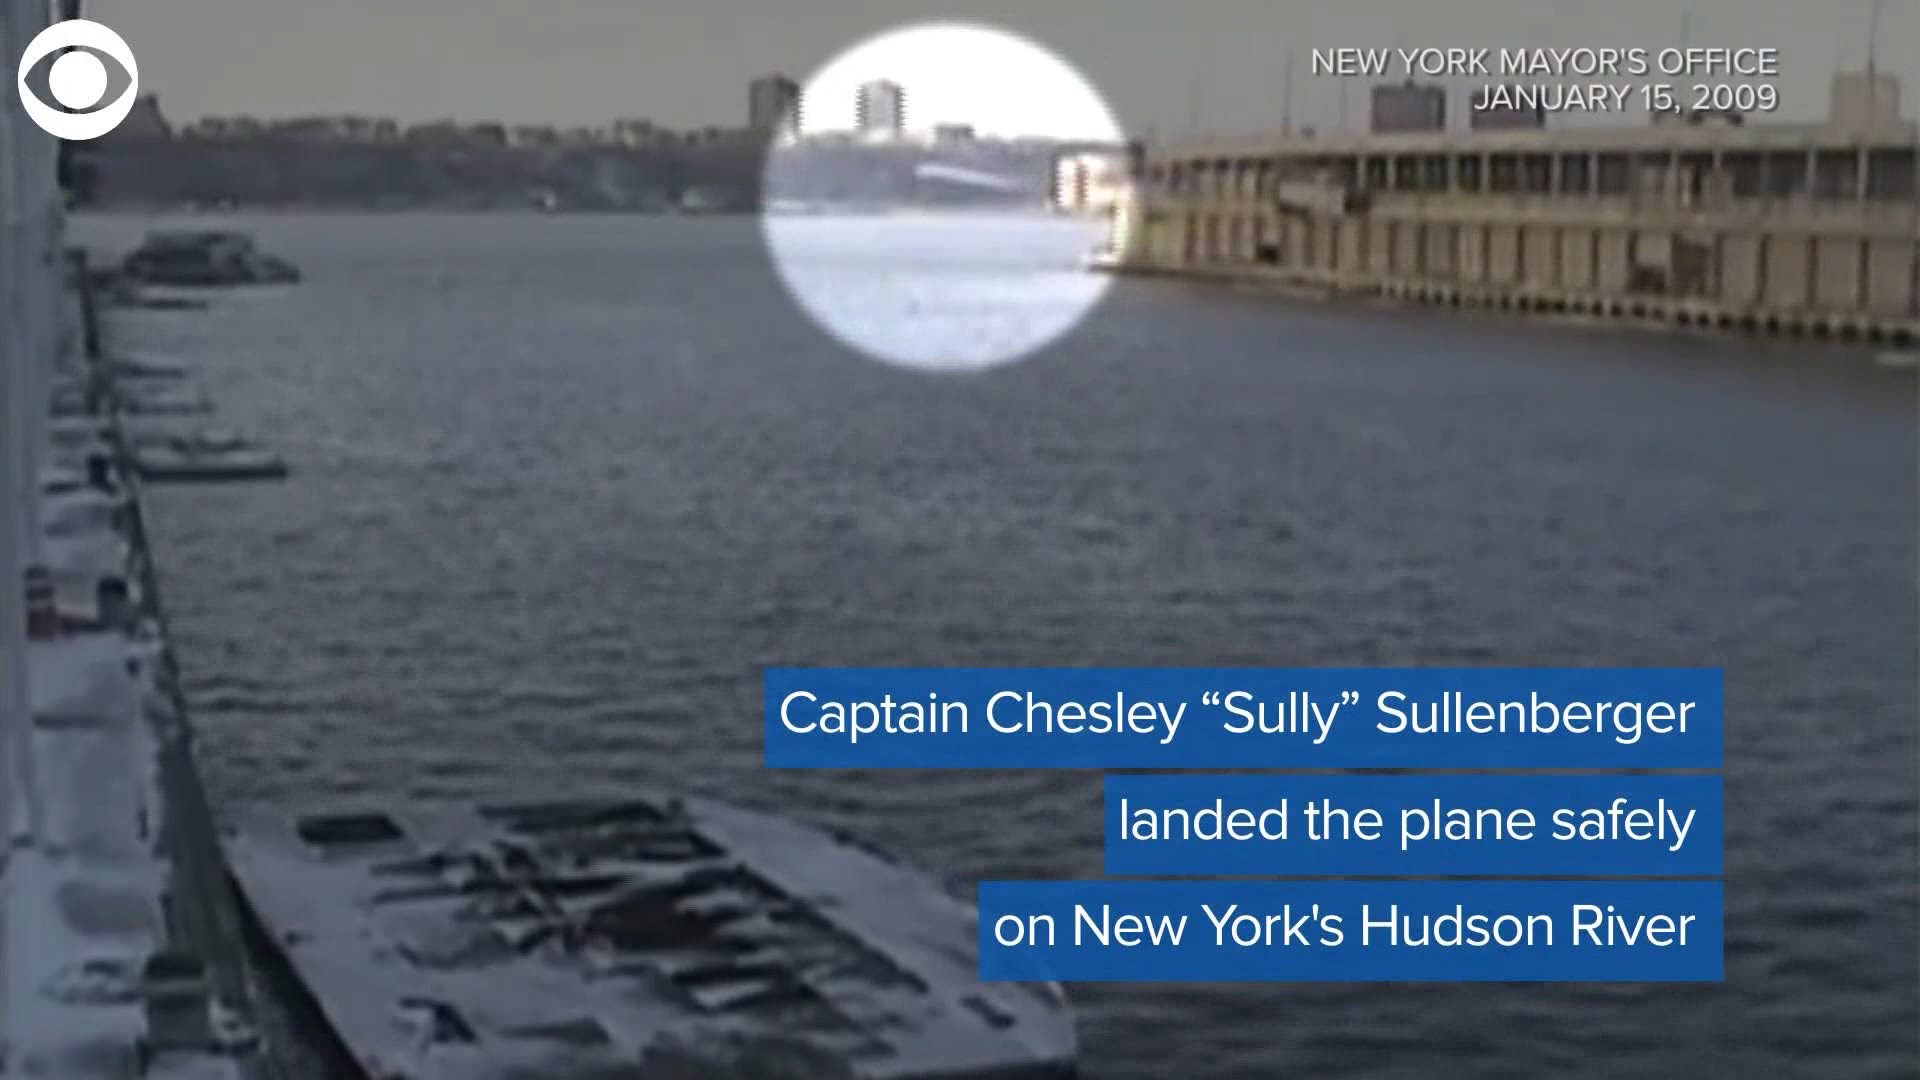 Cameras along the Hudson River caught the moment US Airways flight 1549 landed in the water and the initial rescue efforts on January 15, 2009.